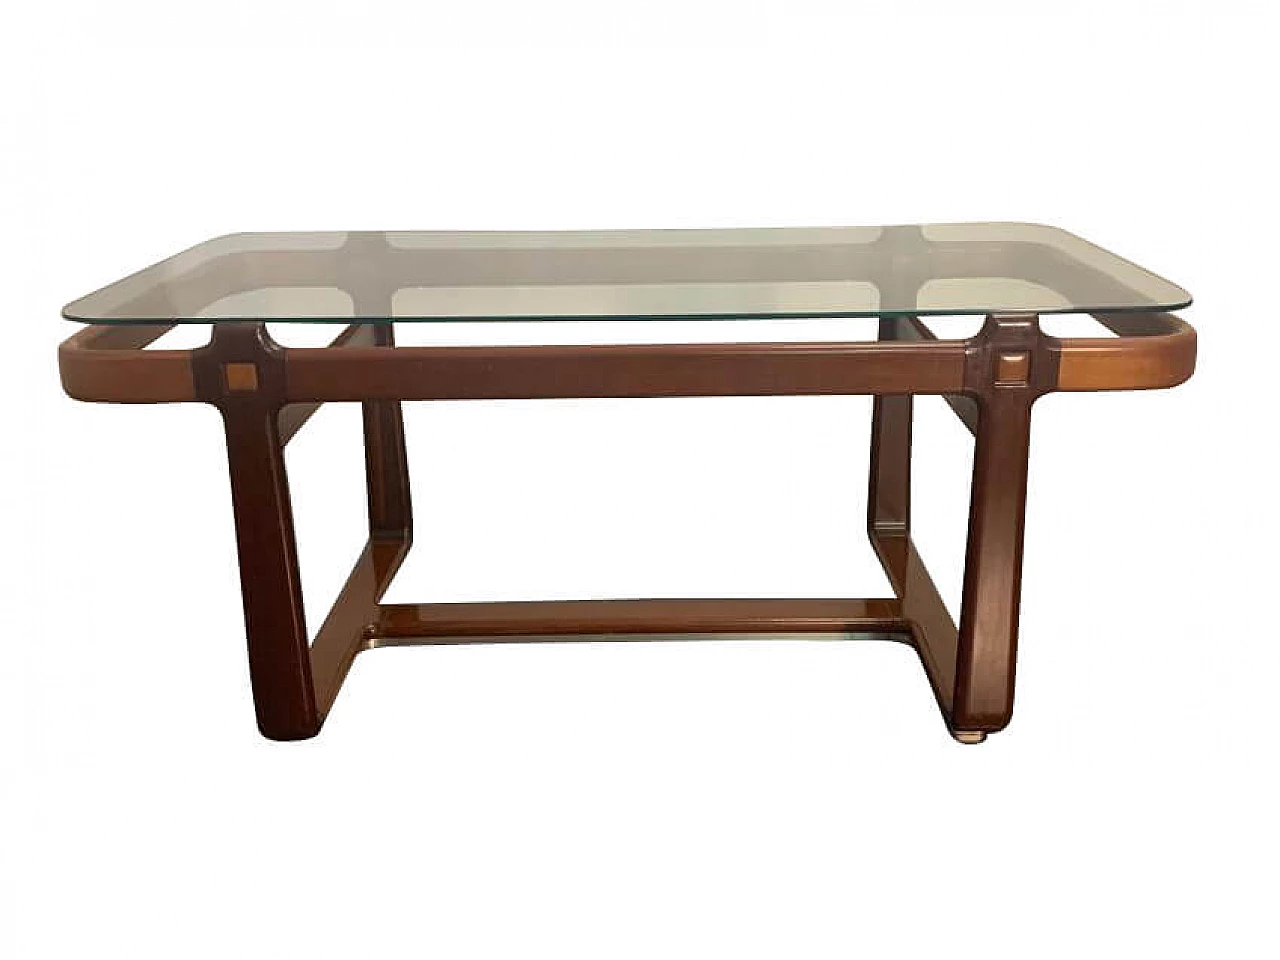 Mahogany dining table with glass top, 1970s 1182812